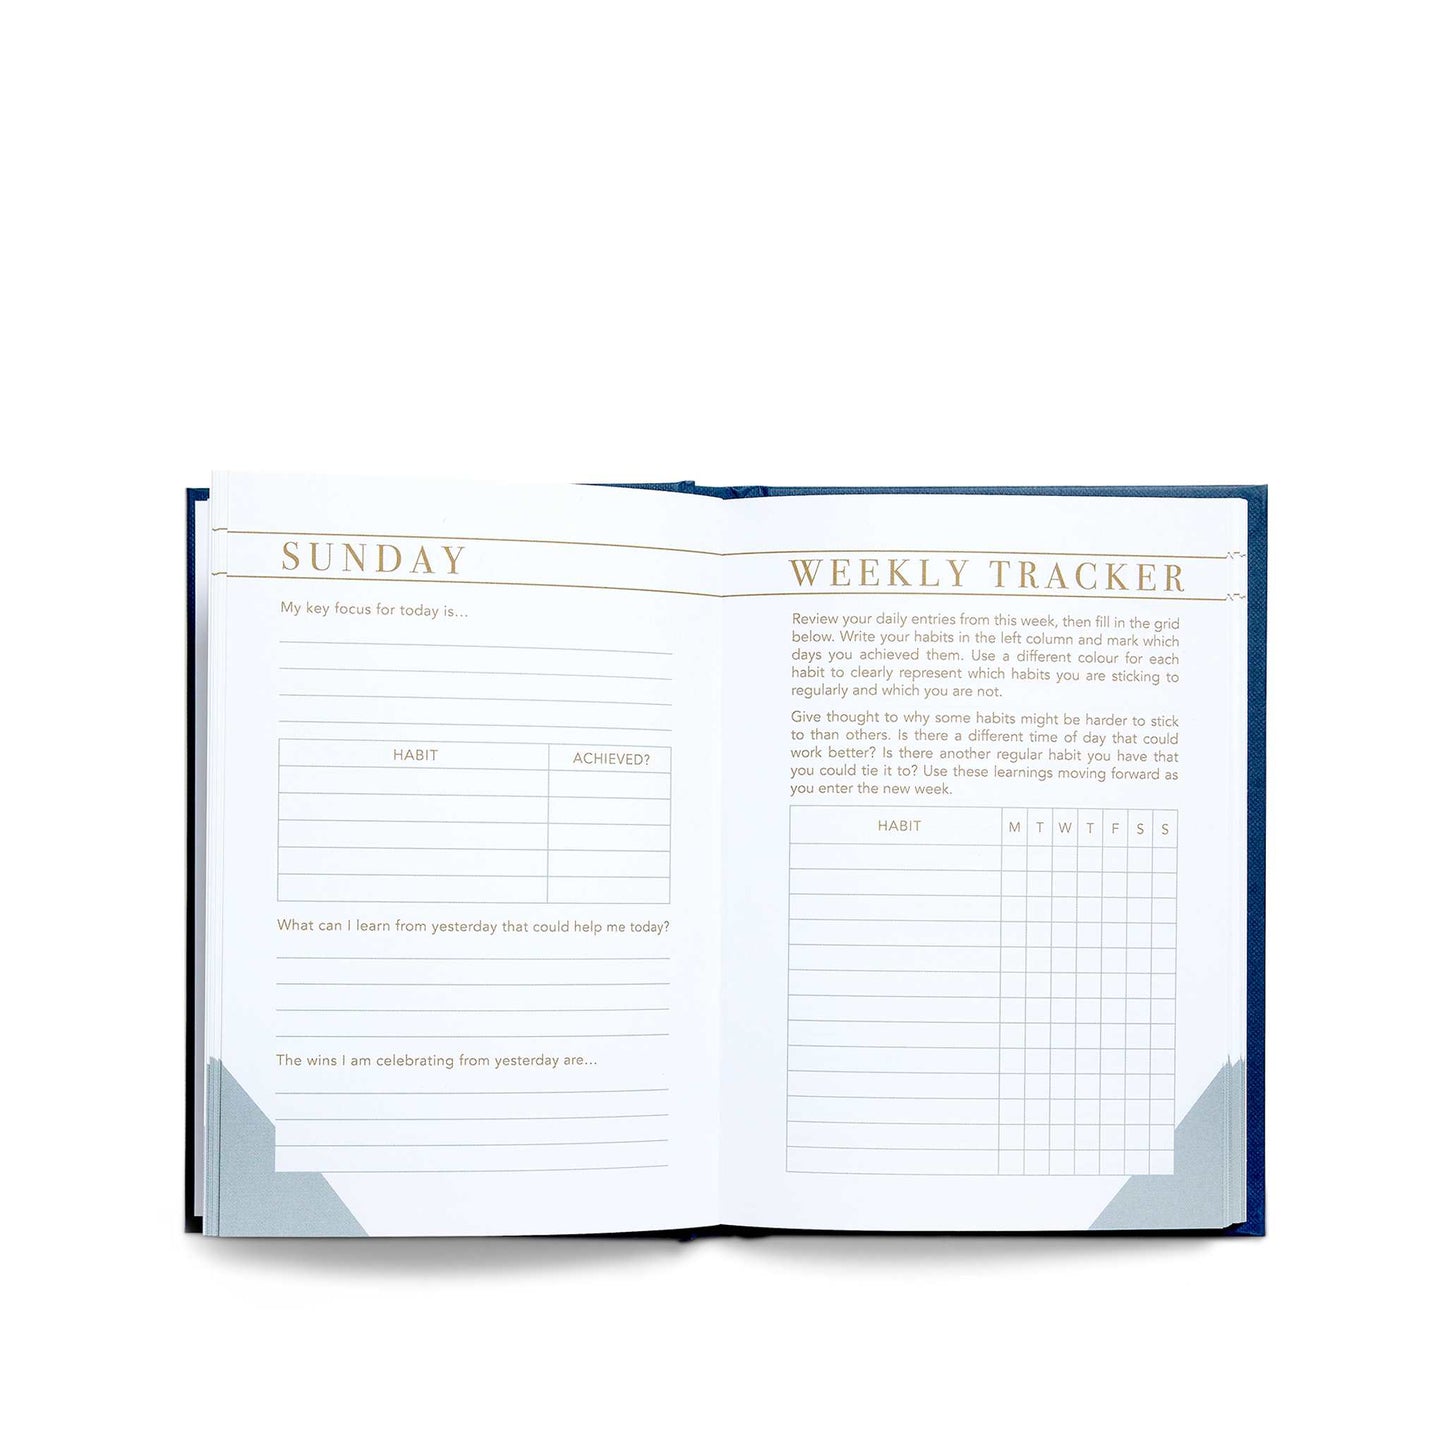 LSW Stationery LSW Habit Notes - Undated Daily Habit Tracking Journal